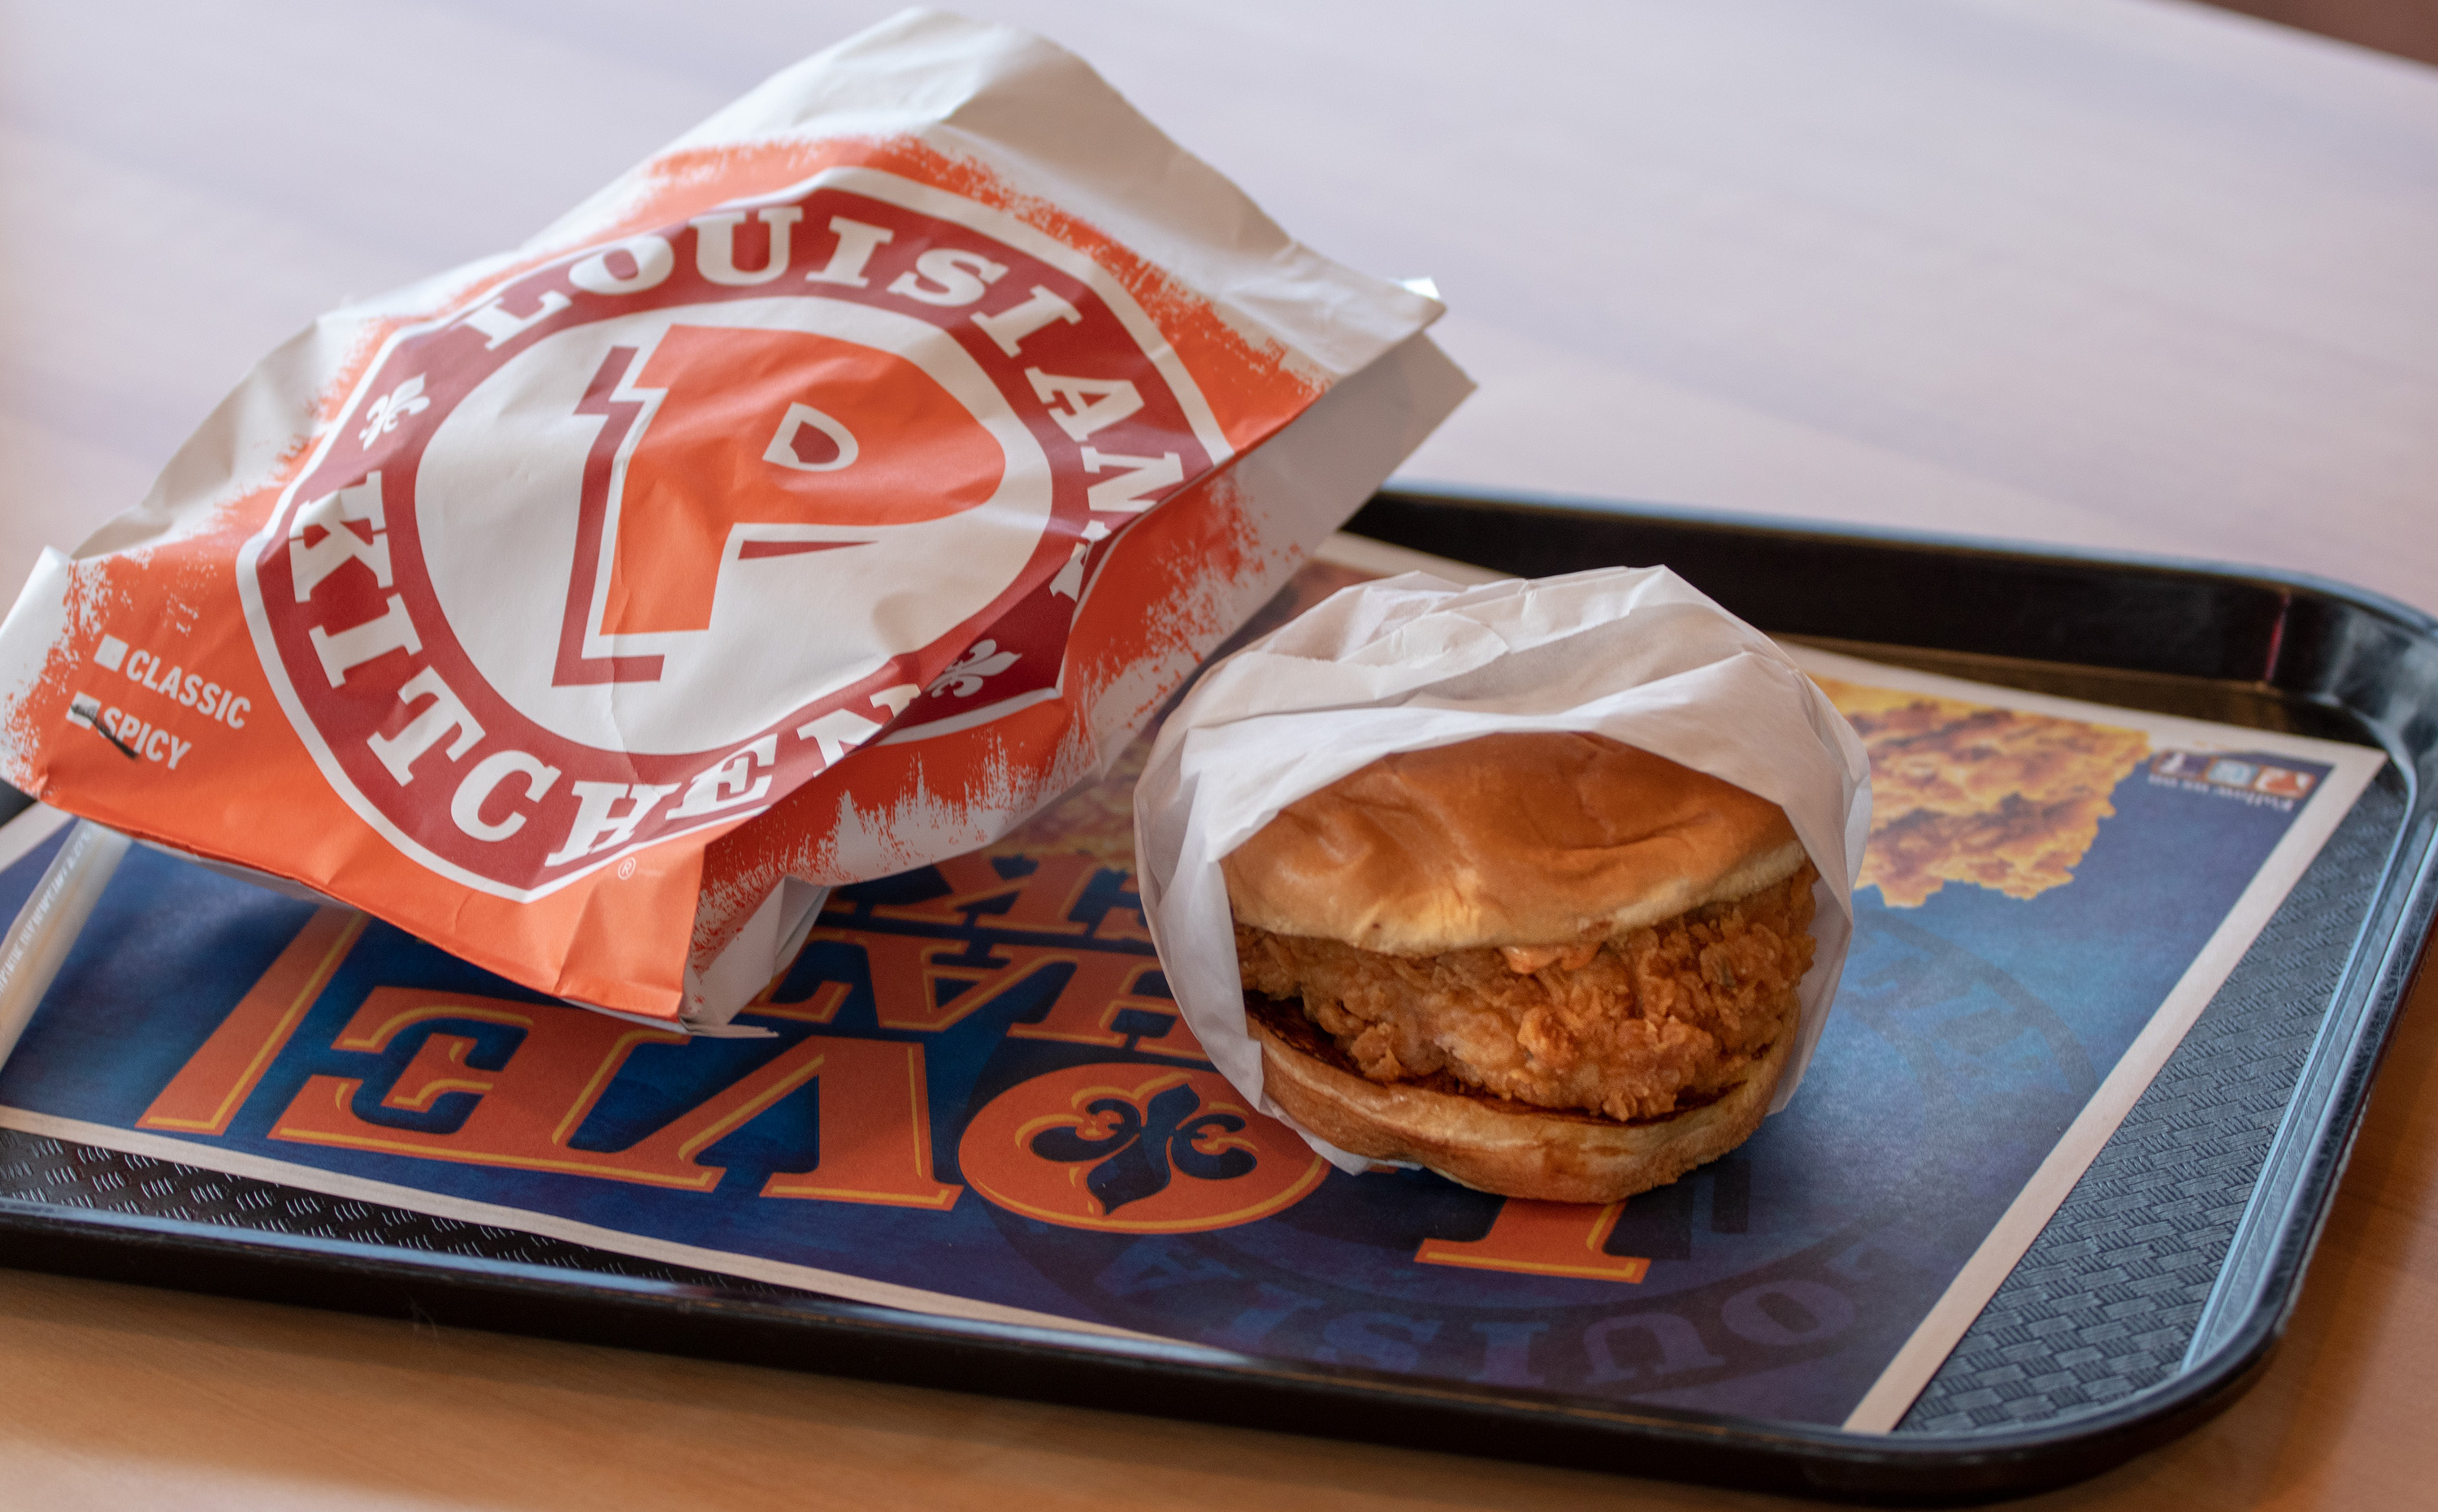 How Popeyes Used Millennial and Gen Z Marketing to Boost Their Business